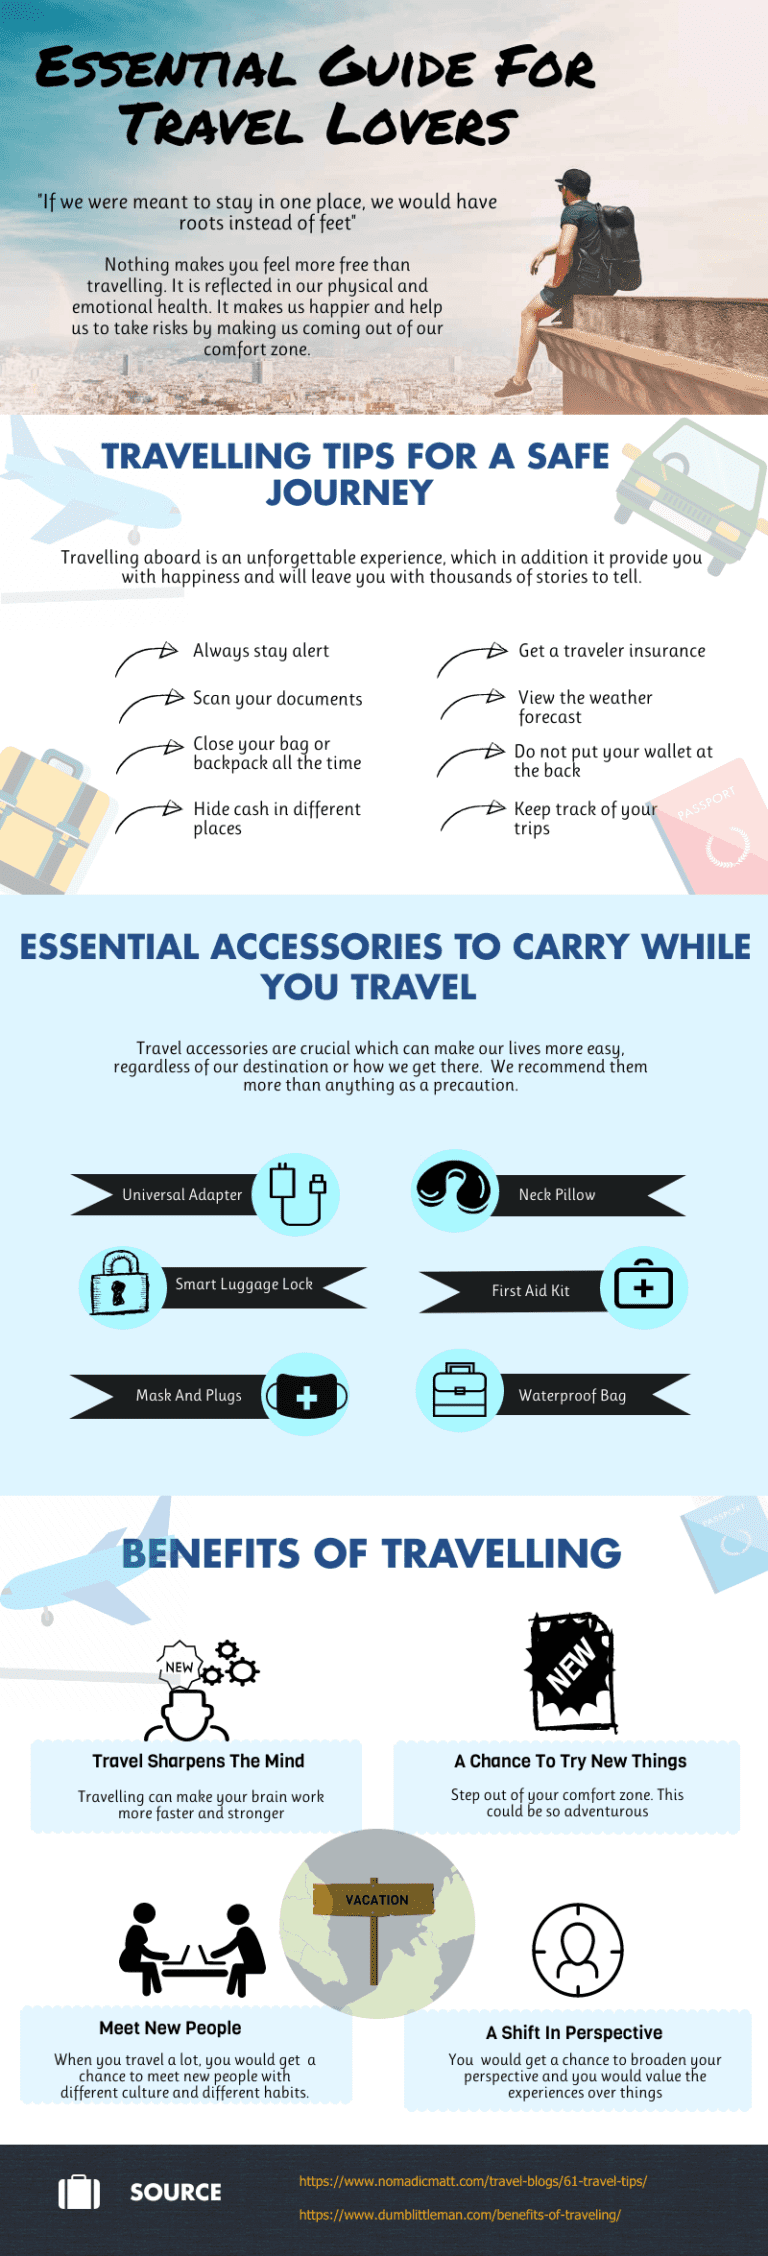 essential guide for travel lovers